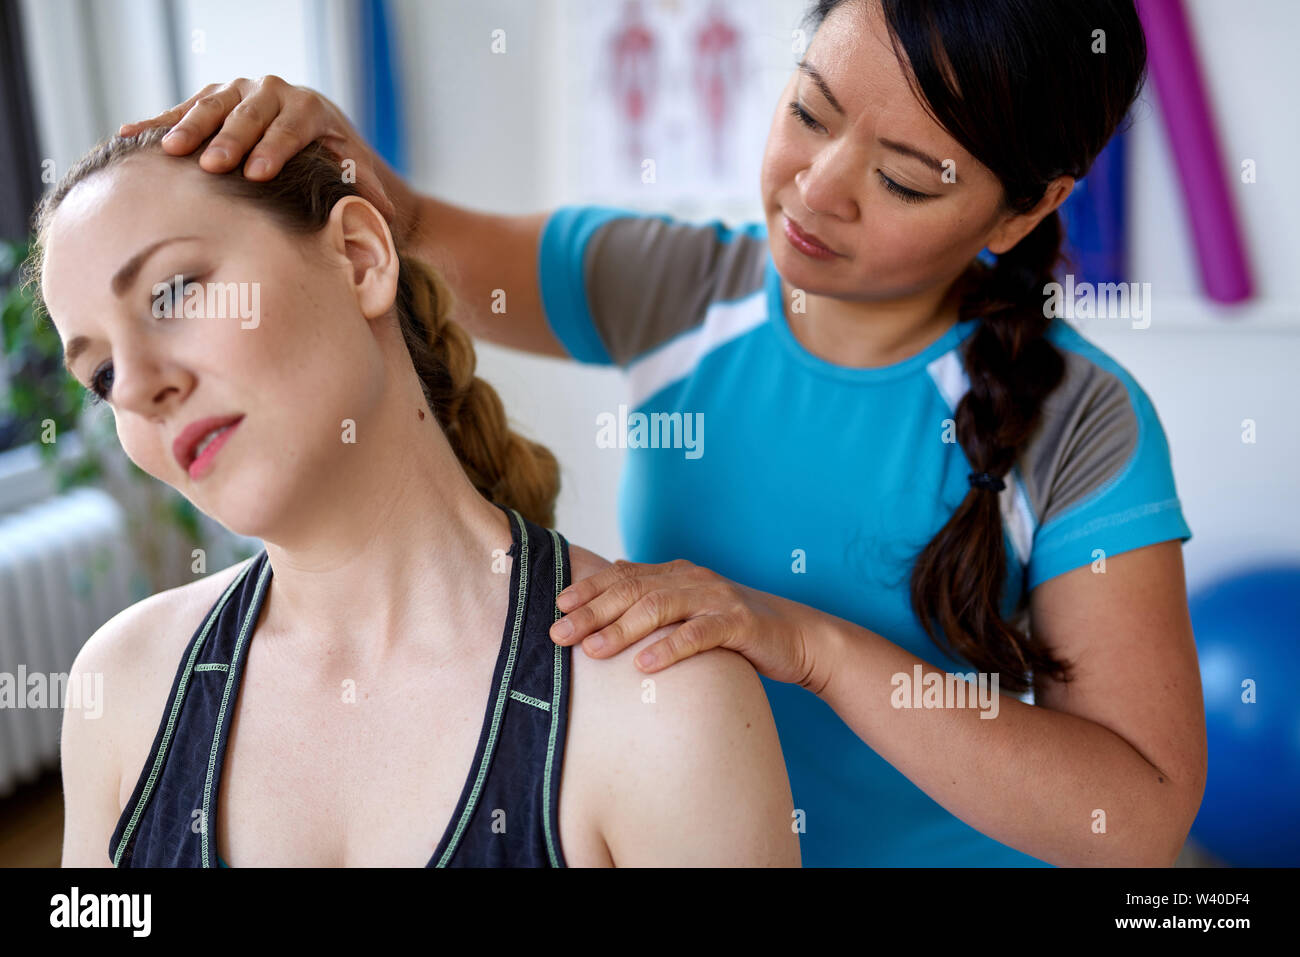 Chinese woman physiotherapy professional giving a treatment to an attractive blond client in a bright medical office Stock Photo